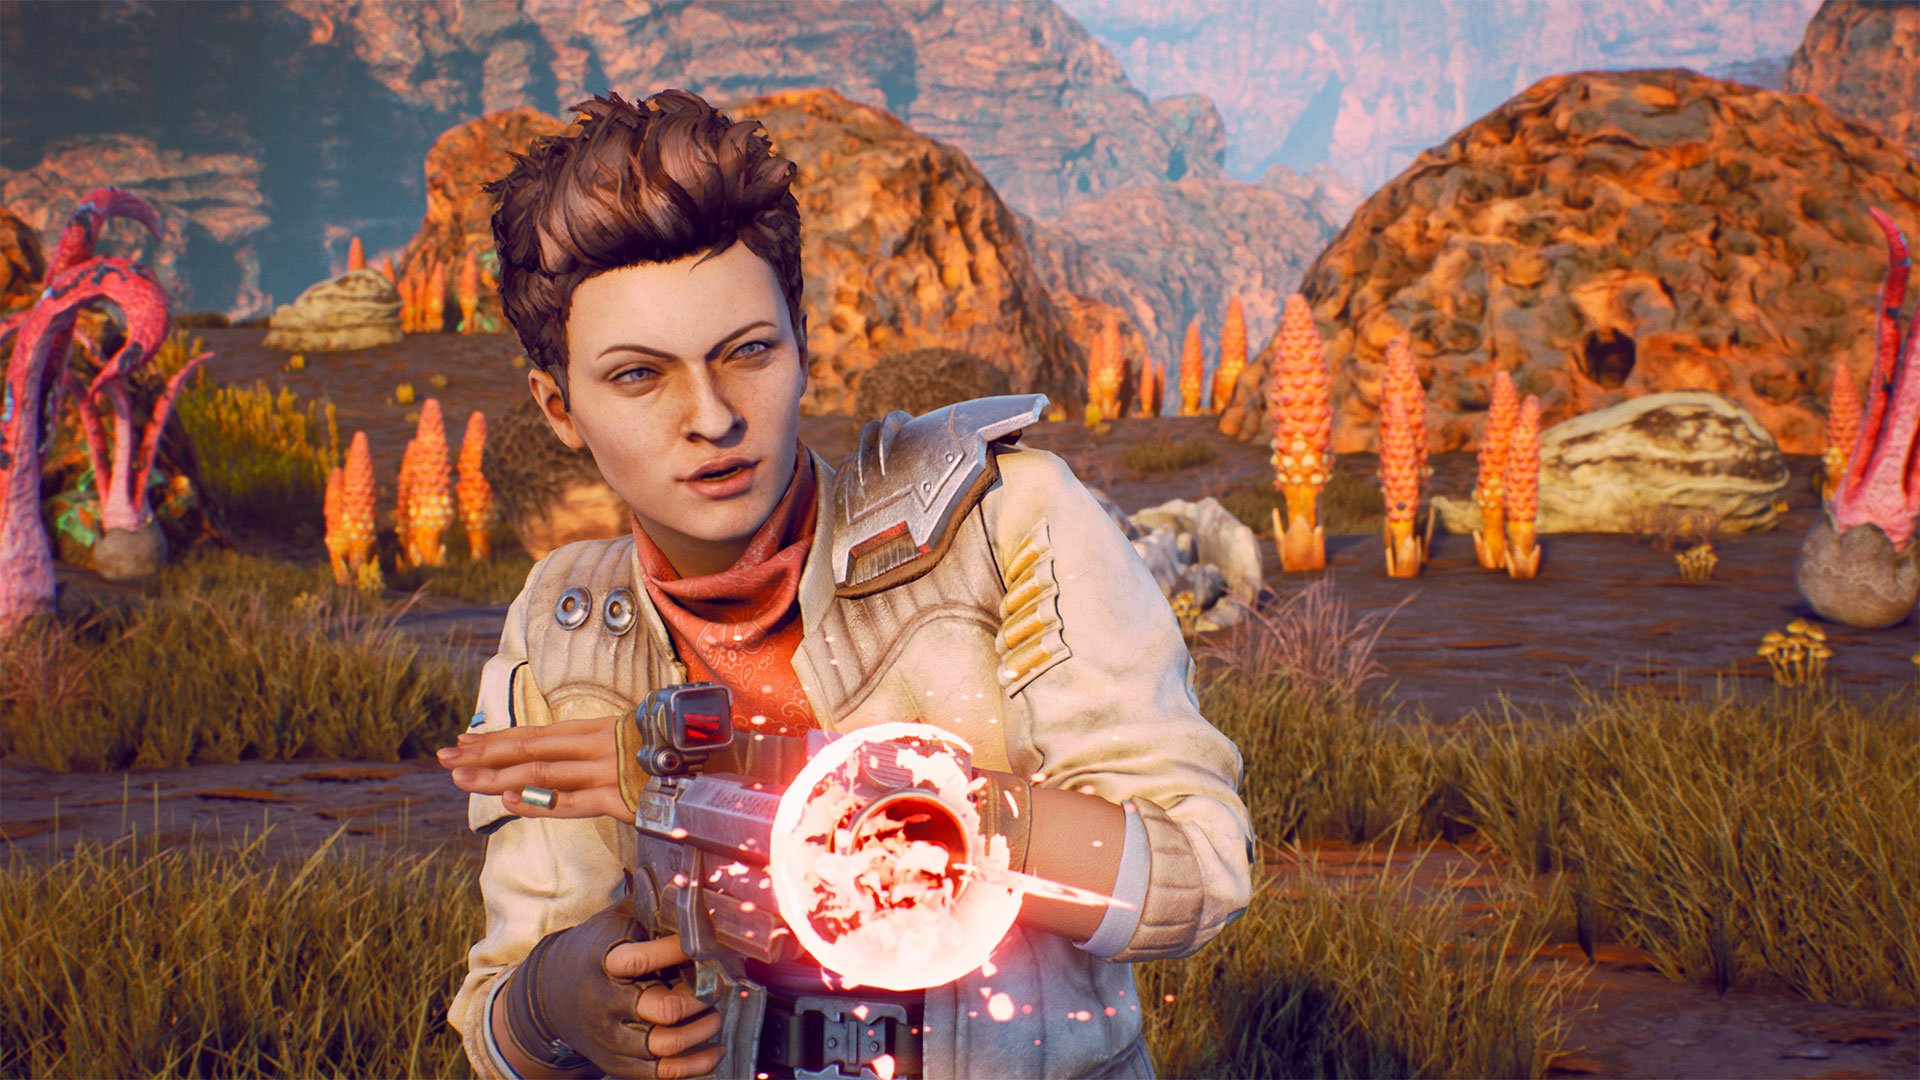 The Outer Worlds-Obsidian Entertainment-Virtuos-Take-Two Interactive- Private Division-Microsoft Windows-PlayStation 4-Xbox One-
Nintendo Switch